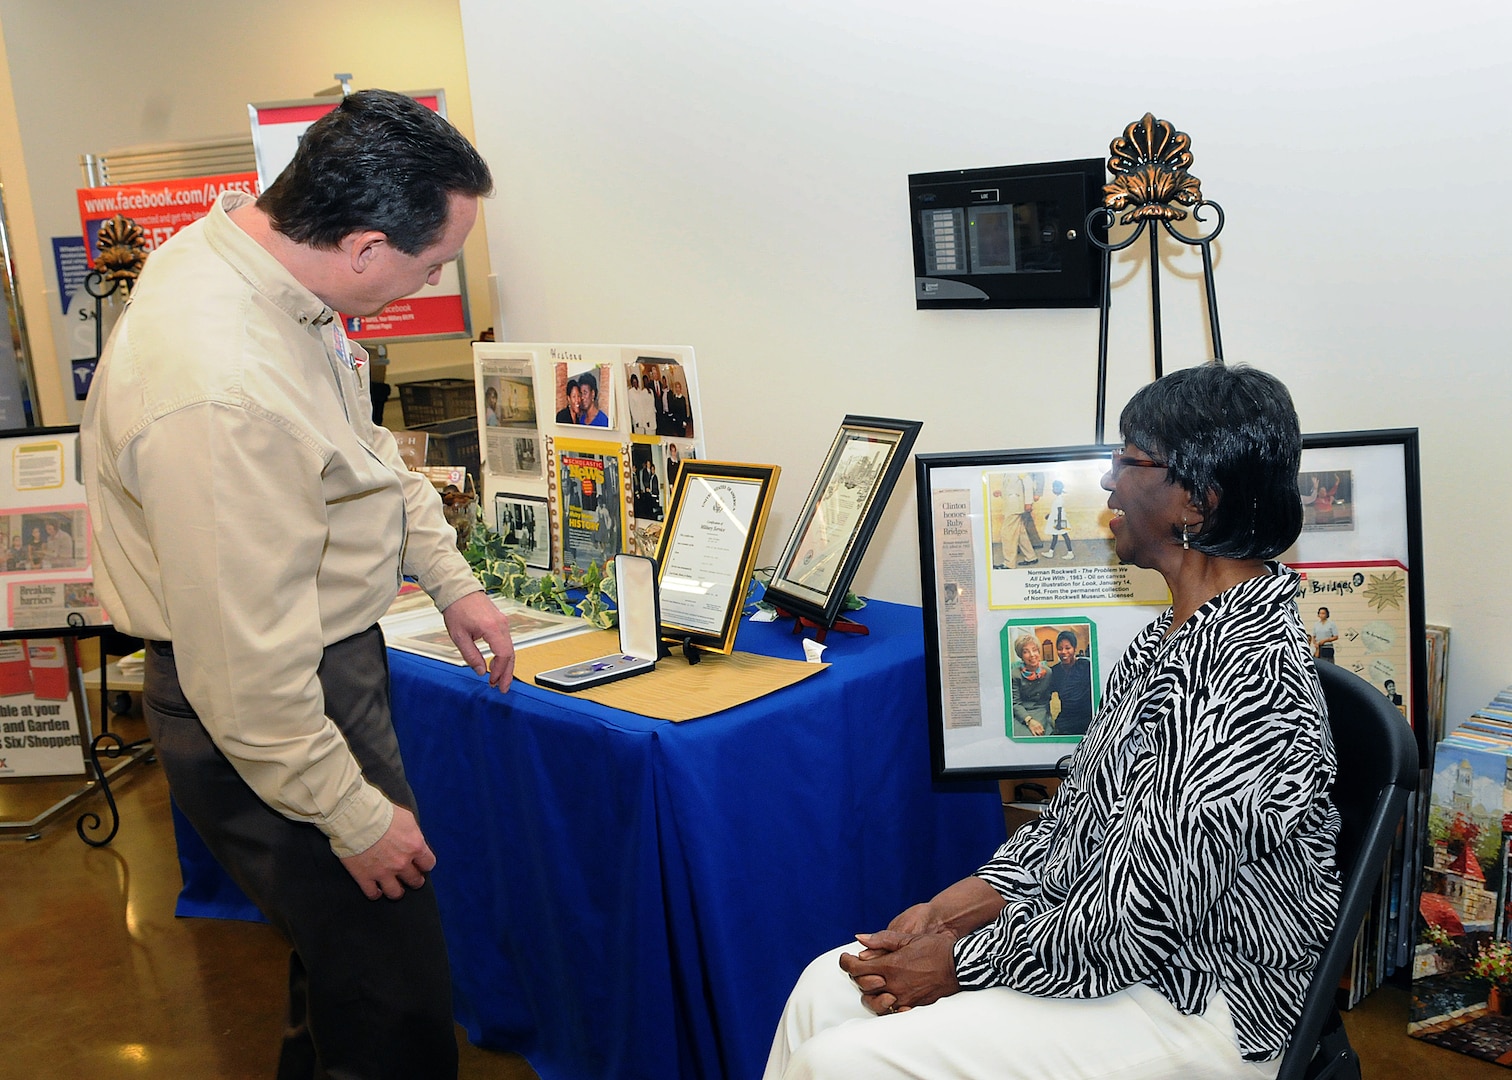 Randolph AFB, TX, 3/31/2011:  Mike Einer, manager of the Base Exchange at Randolph Air Force Base, Texas, views civil rights era documents and photographs on display by Lucille Bridges. Her daughter Ruby in 1960 was among the first African-American students to integrate New Orleans public schools. Bridges spoke to several groups at the base, and greeted people at the Base Exchange, during her visit  on March 31, 2011 as part of Women's History Month. (U.S. Air Force photo/David Terry)